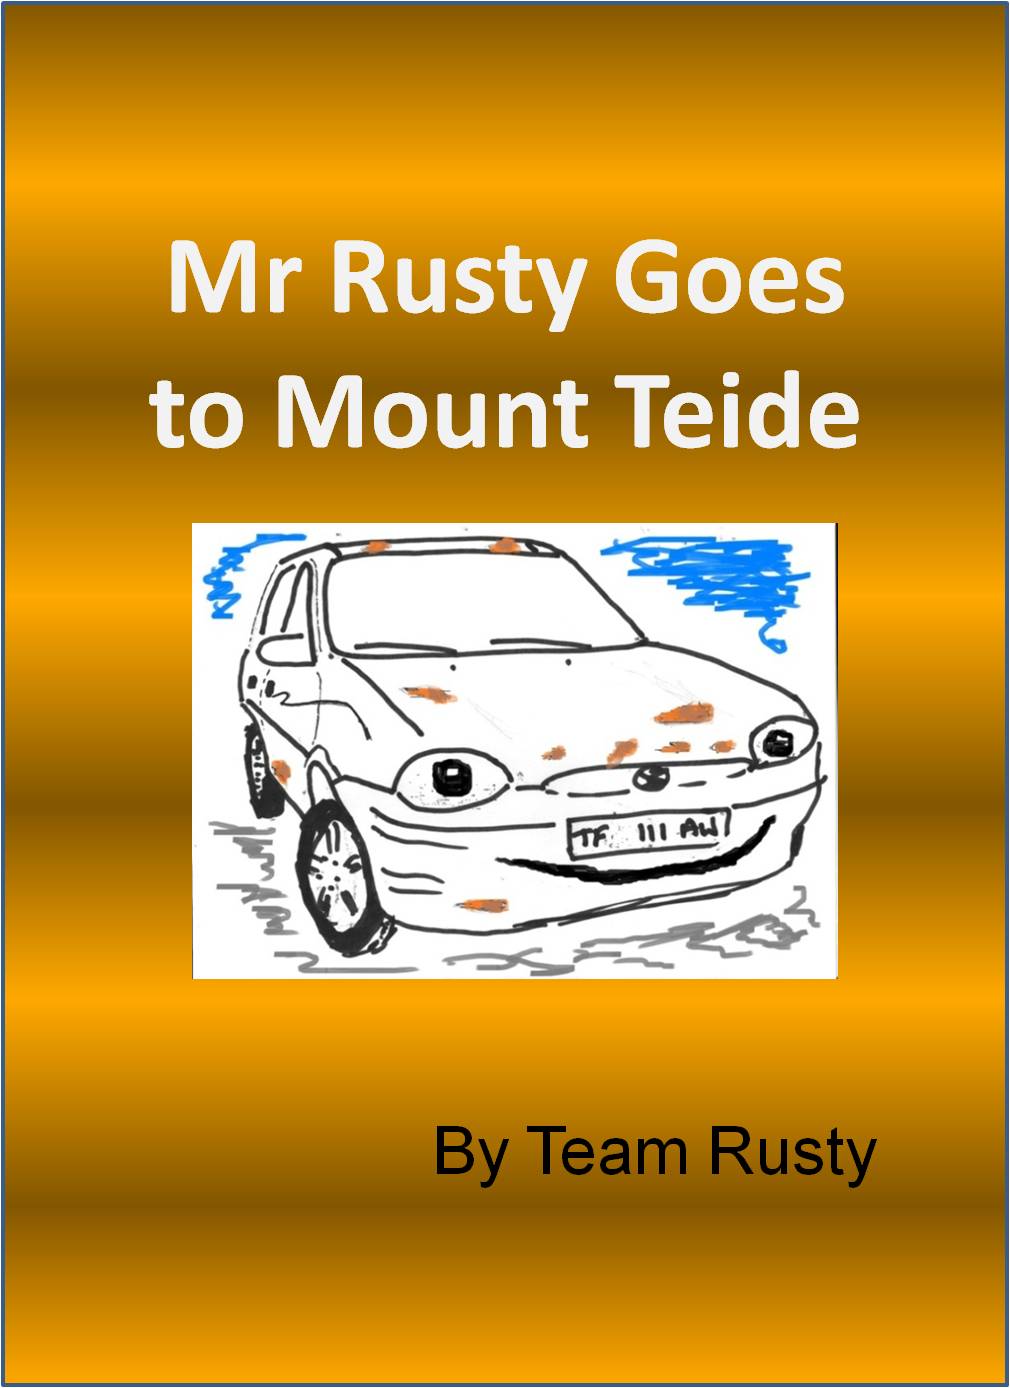 Placeholder PictureMr RUsty stories for children